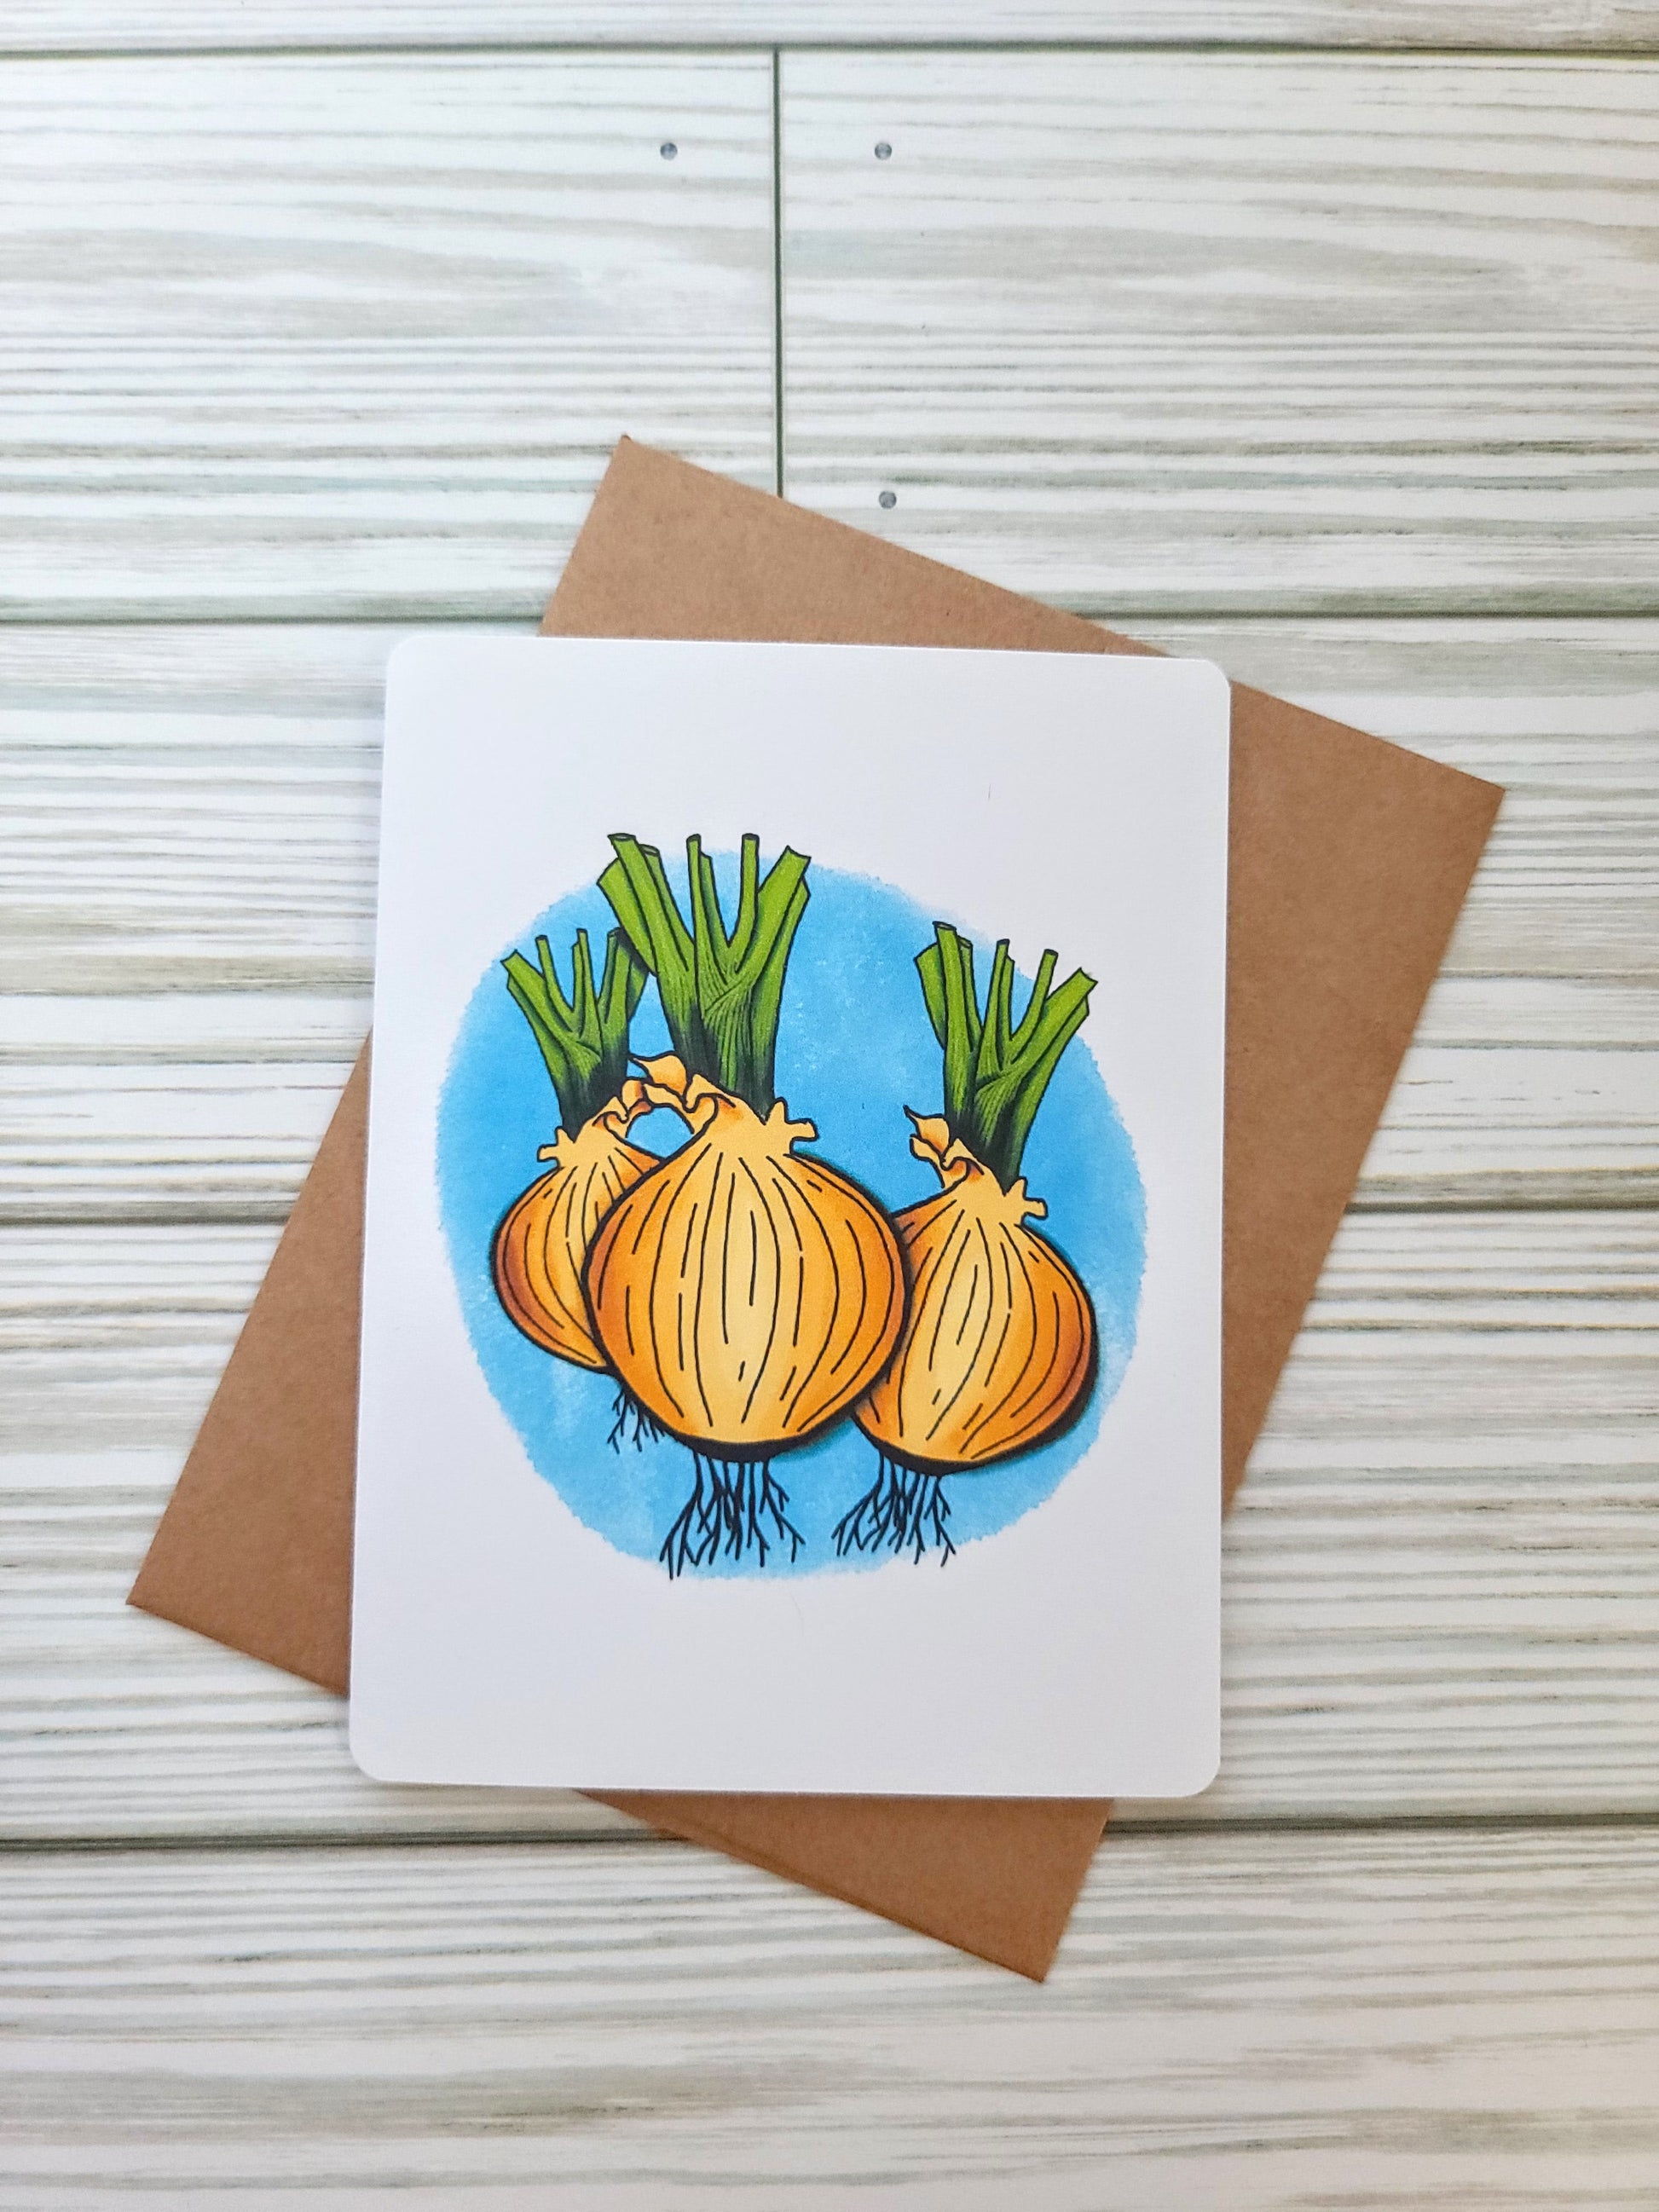 Onion Handmade Greeting Card - Recycled Paper and Kraft Envelope - Overhead Shot